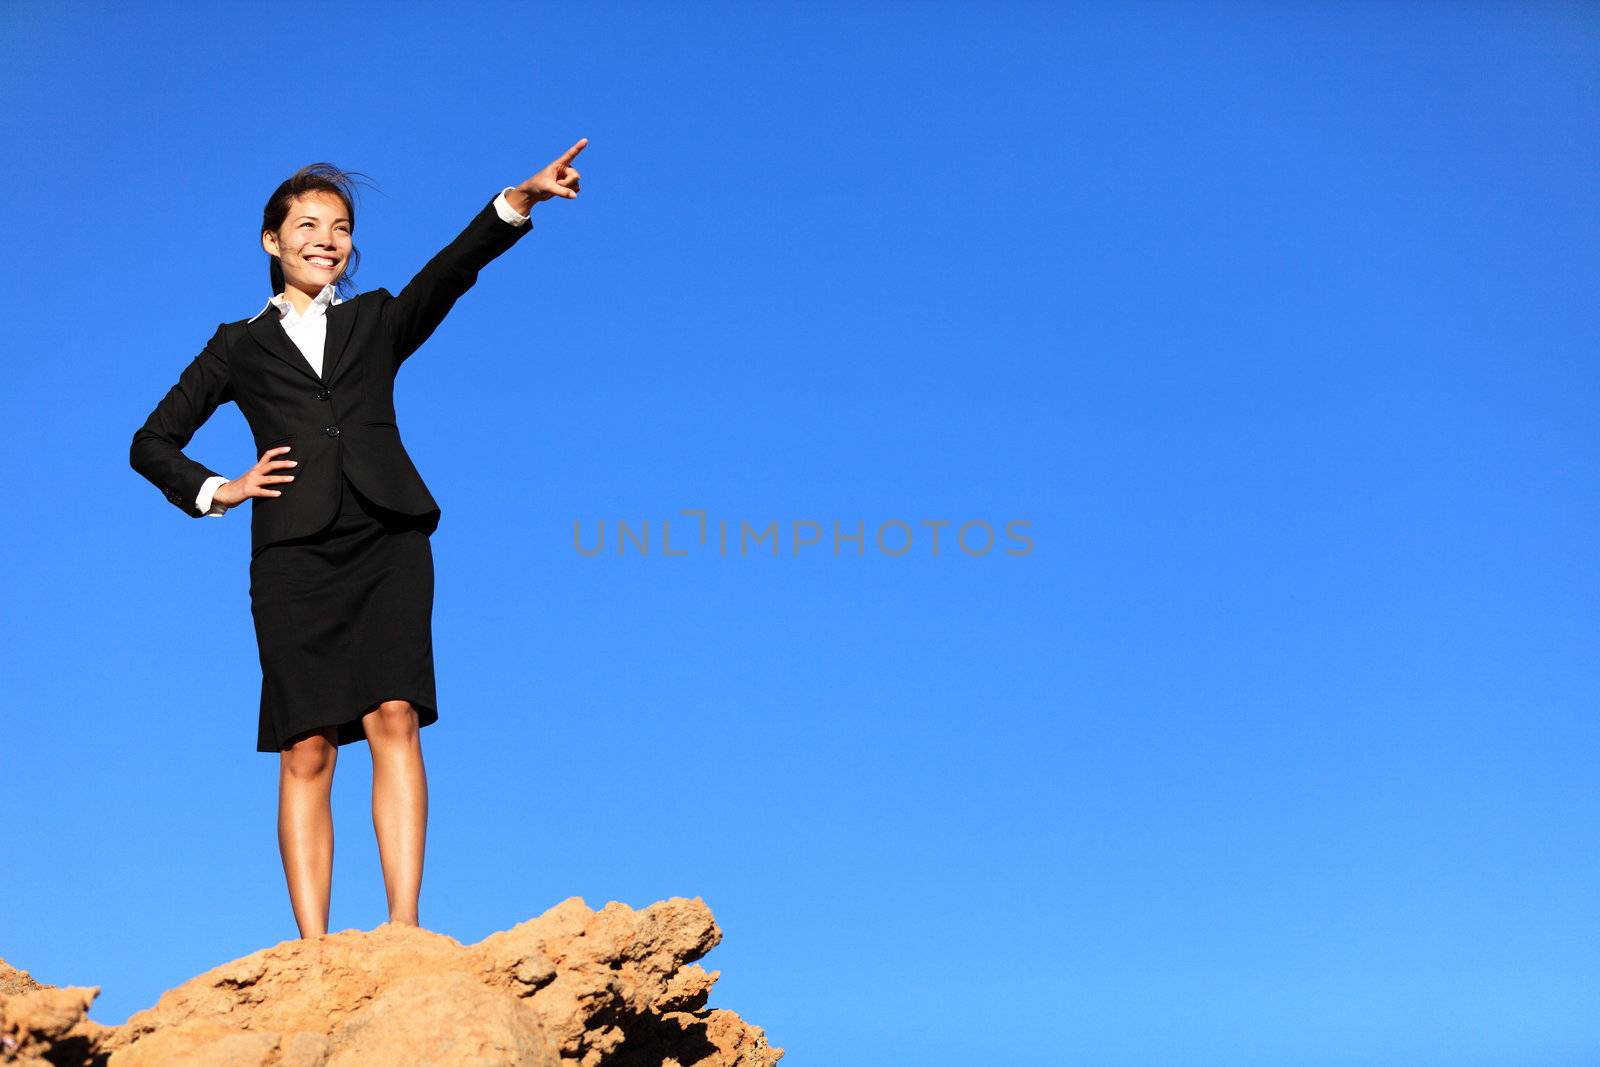 Business concept - businesswoman pointing at future ahead standing on mountain top wearing suit.